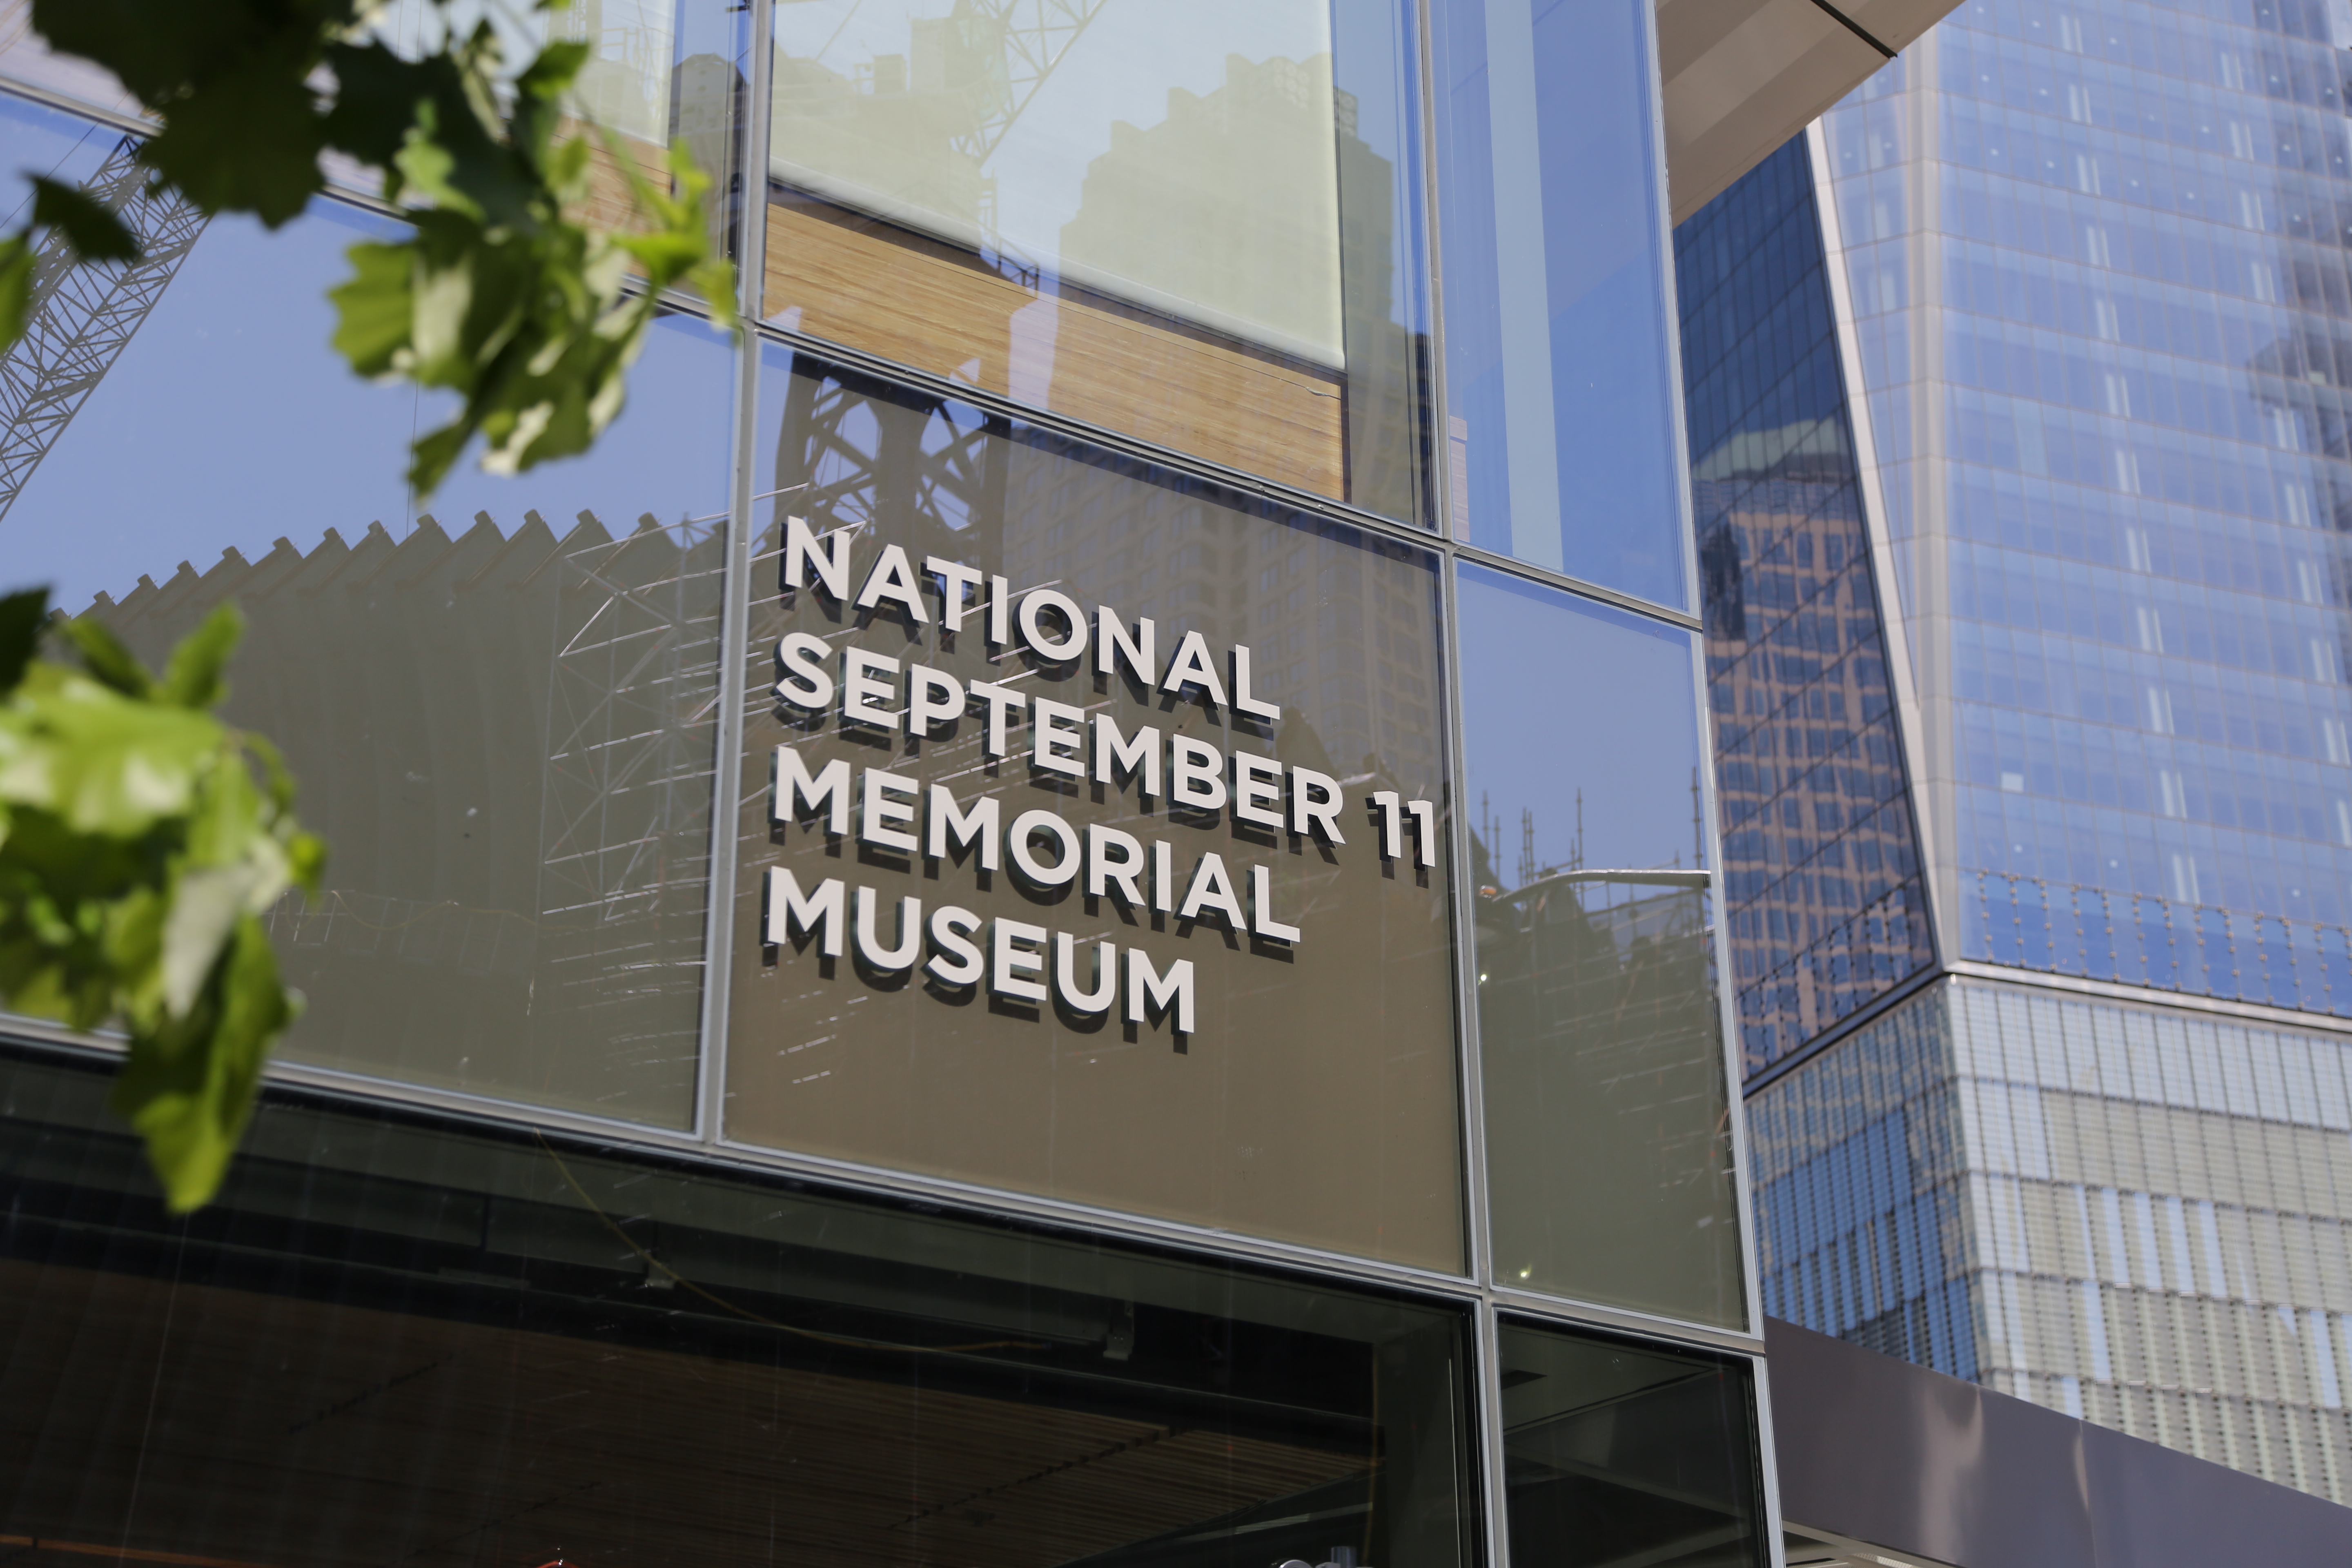 A sign on the glass entrance of the Museum reads National September 11 Memorial Museum.